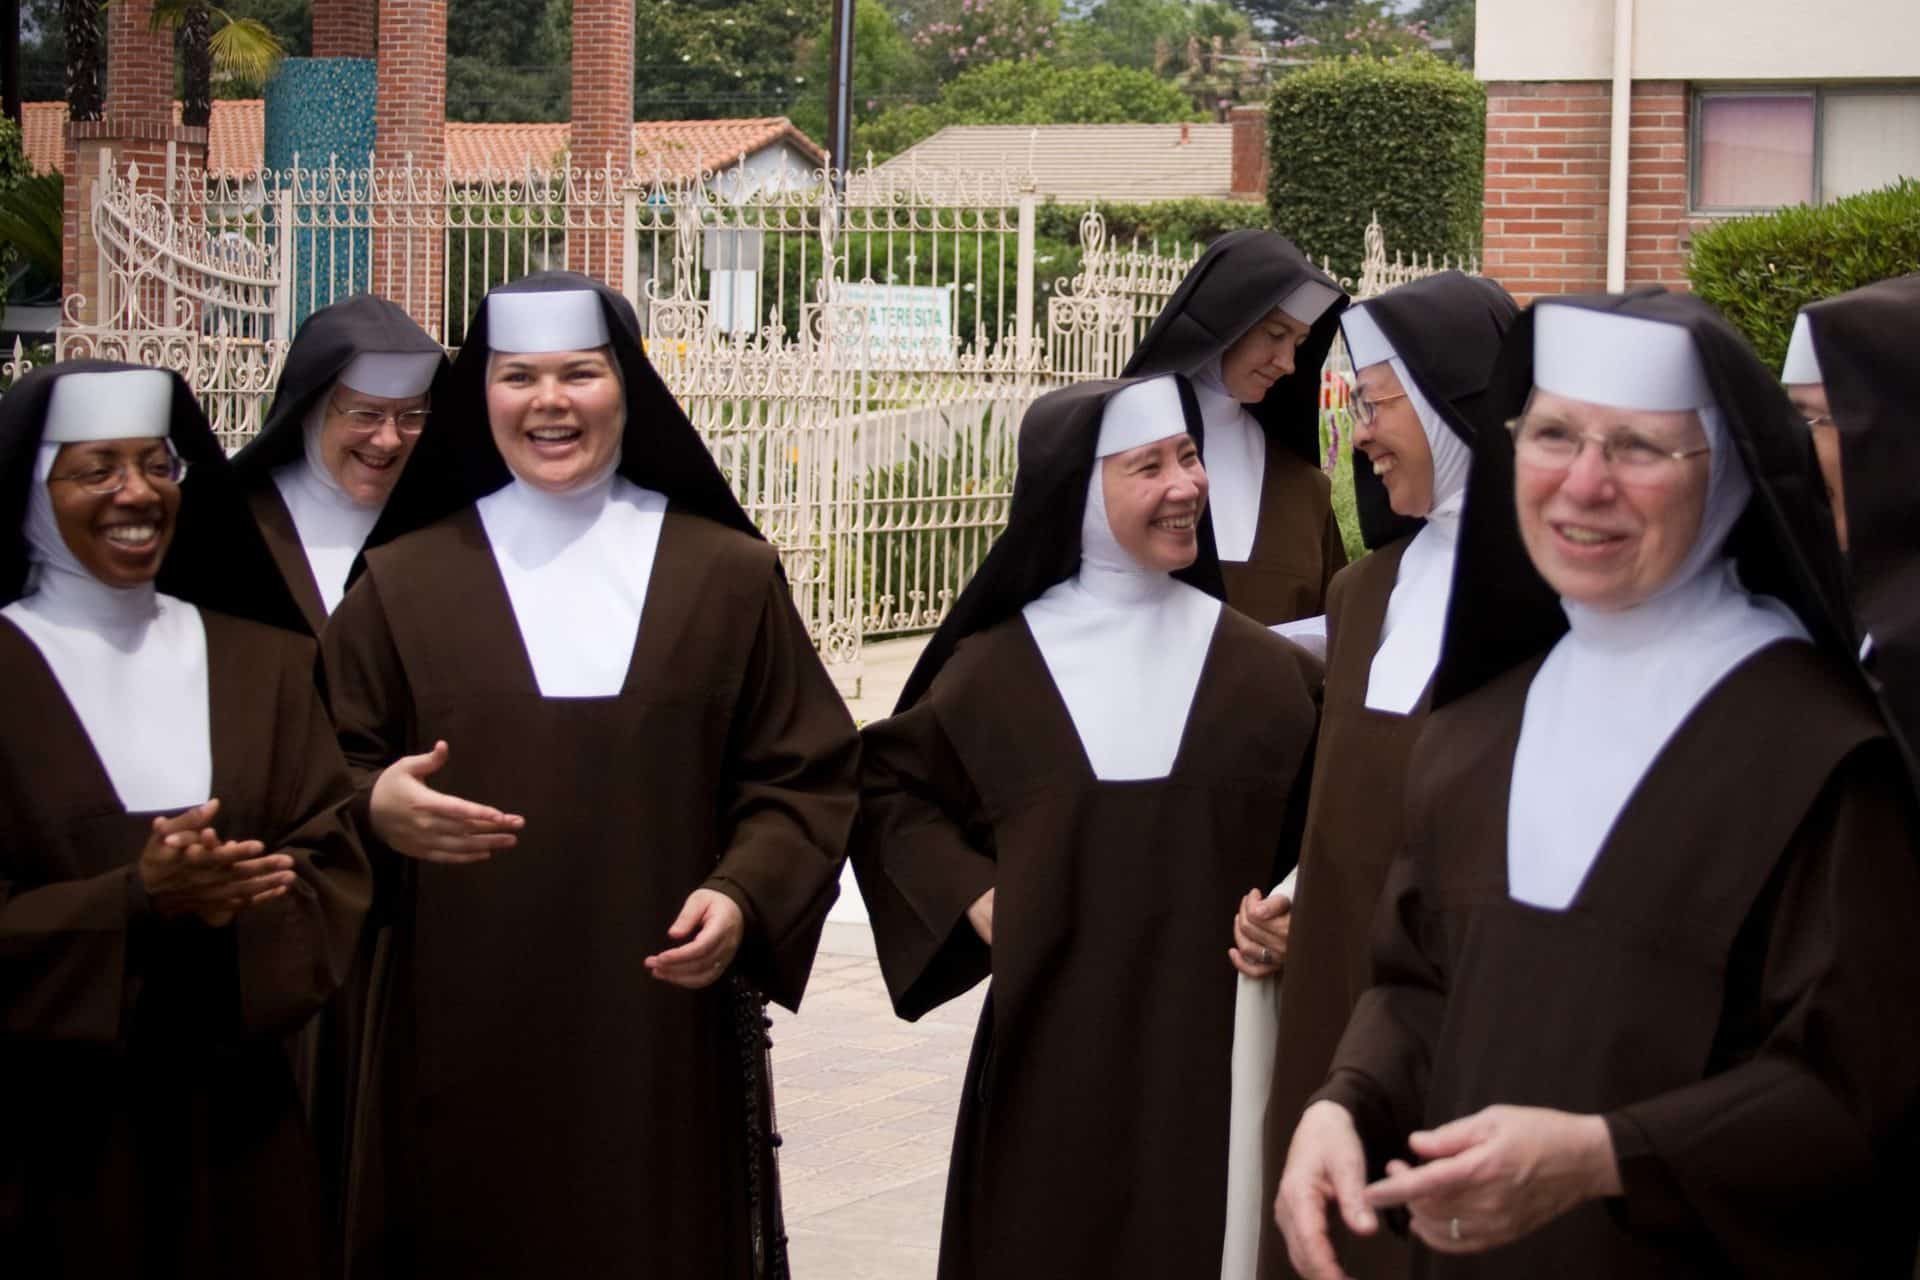 Why the habit? | Carmelite Sisters of the Most Sacred Heart of Los Angeles